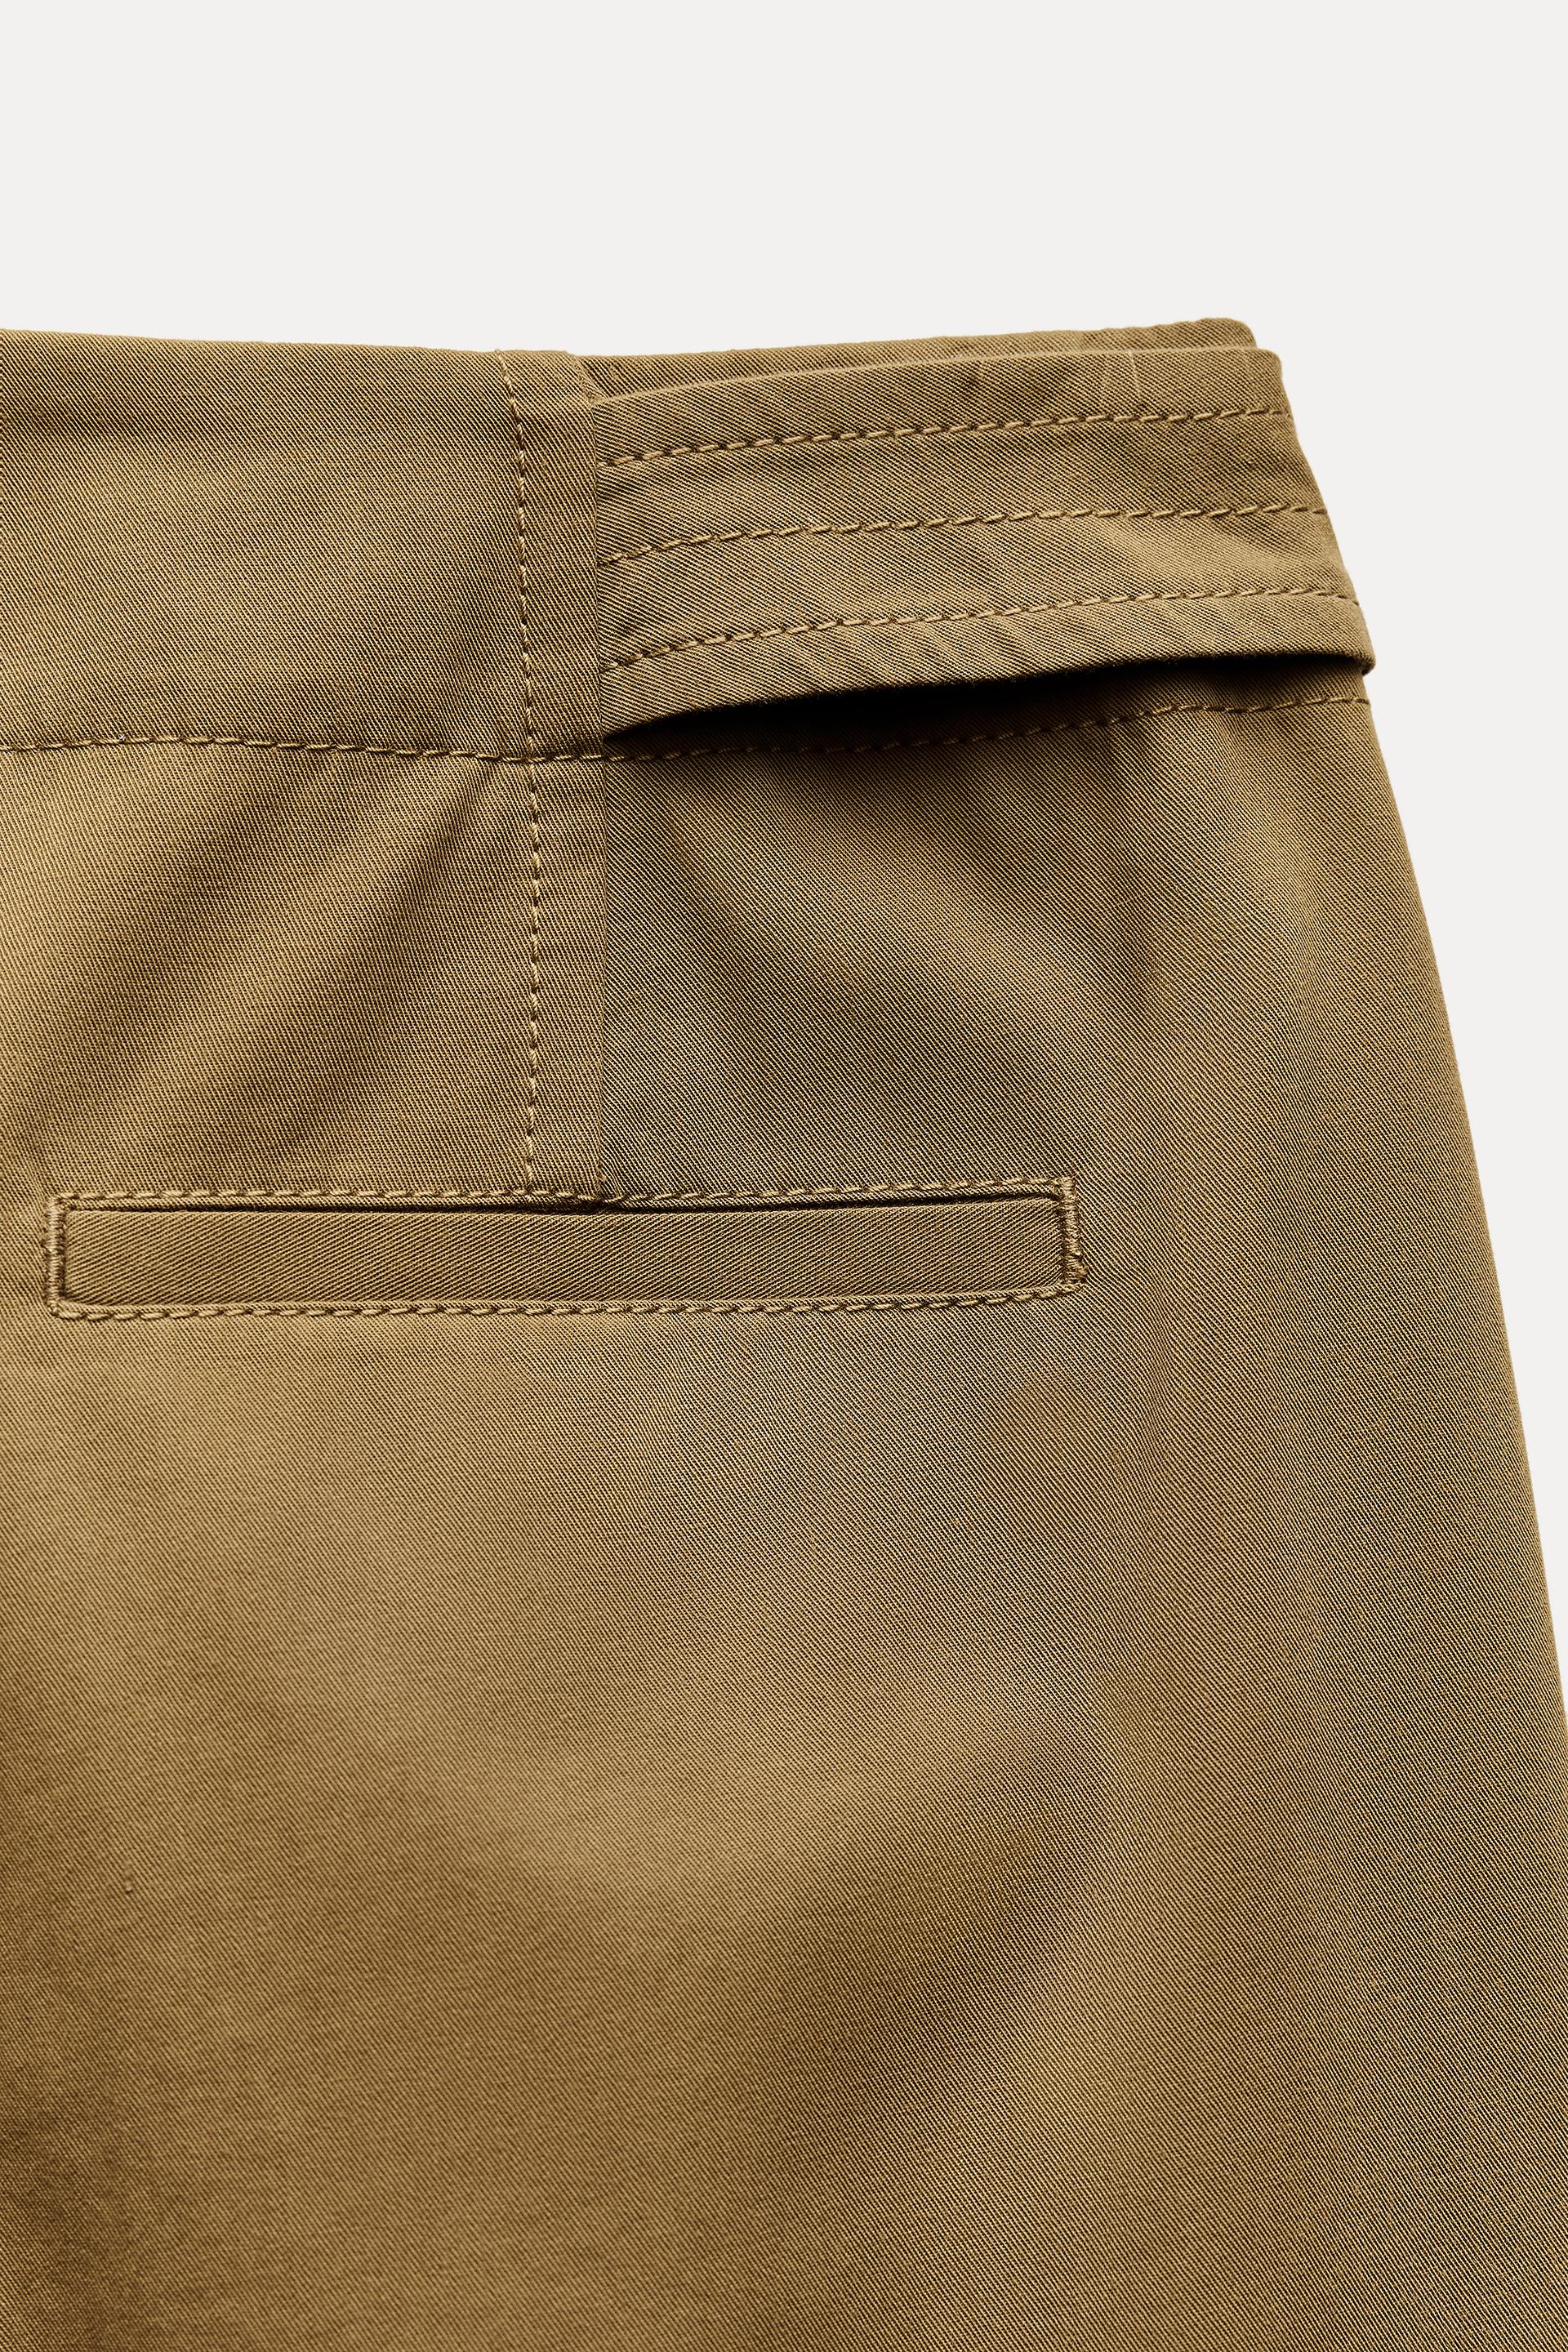 BELTED CHINO PANTS - Mid-camel